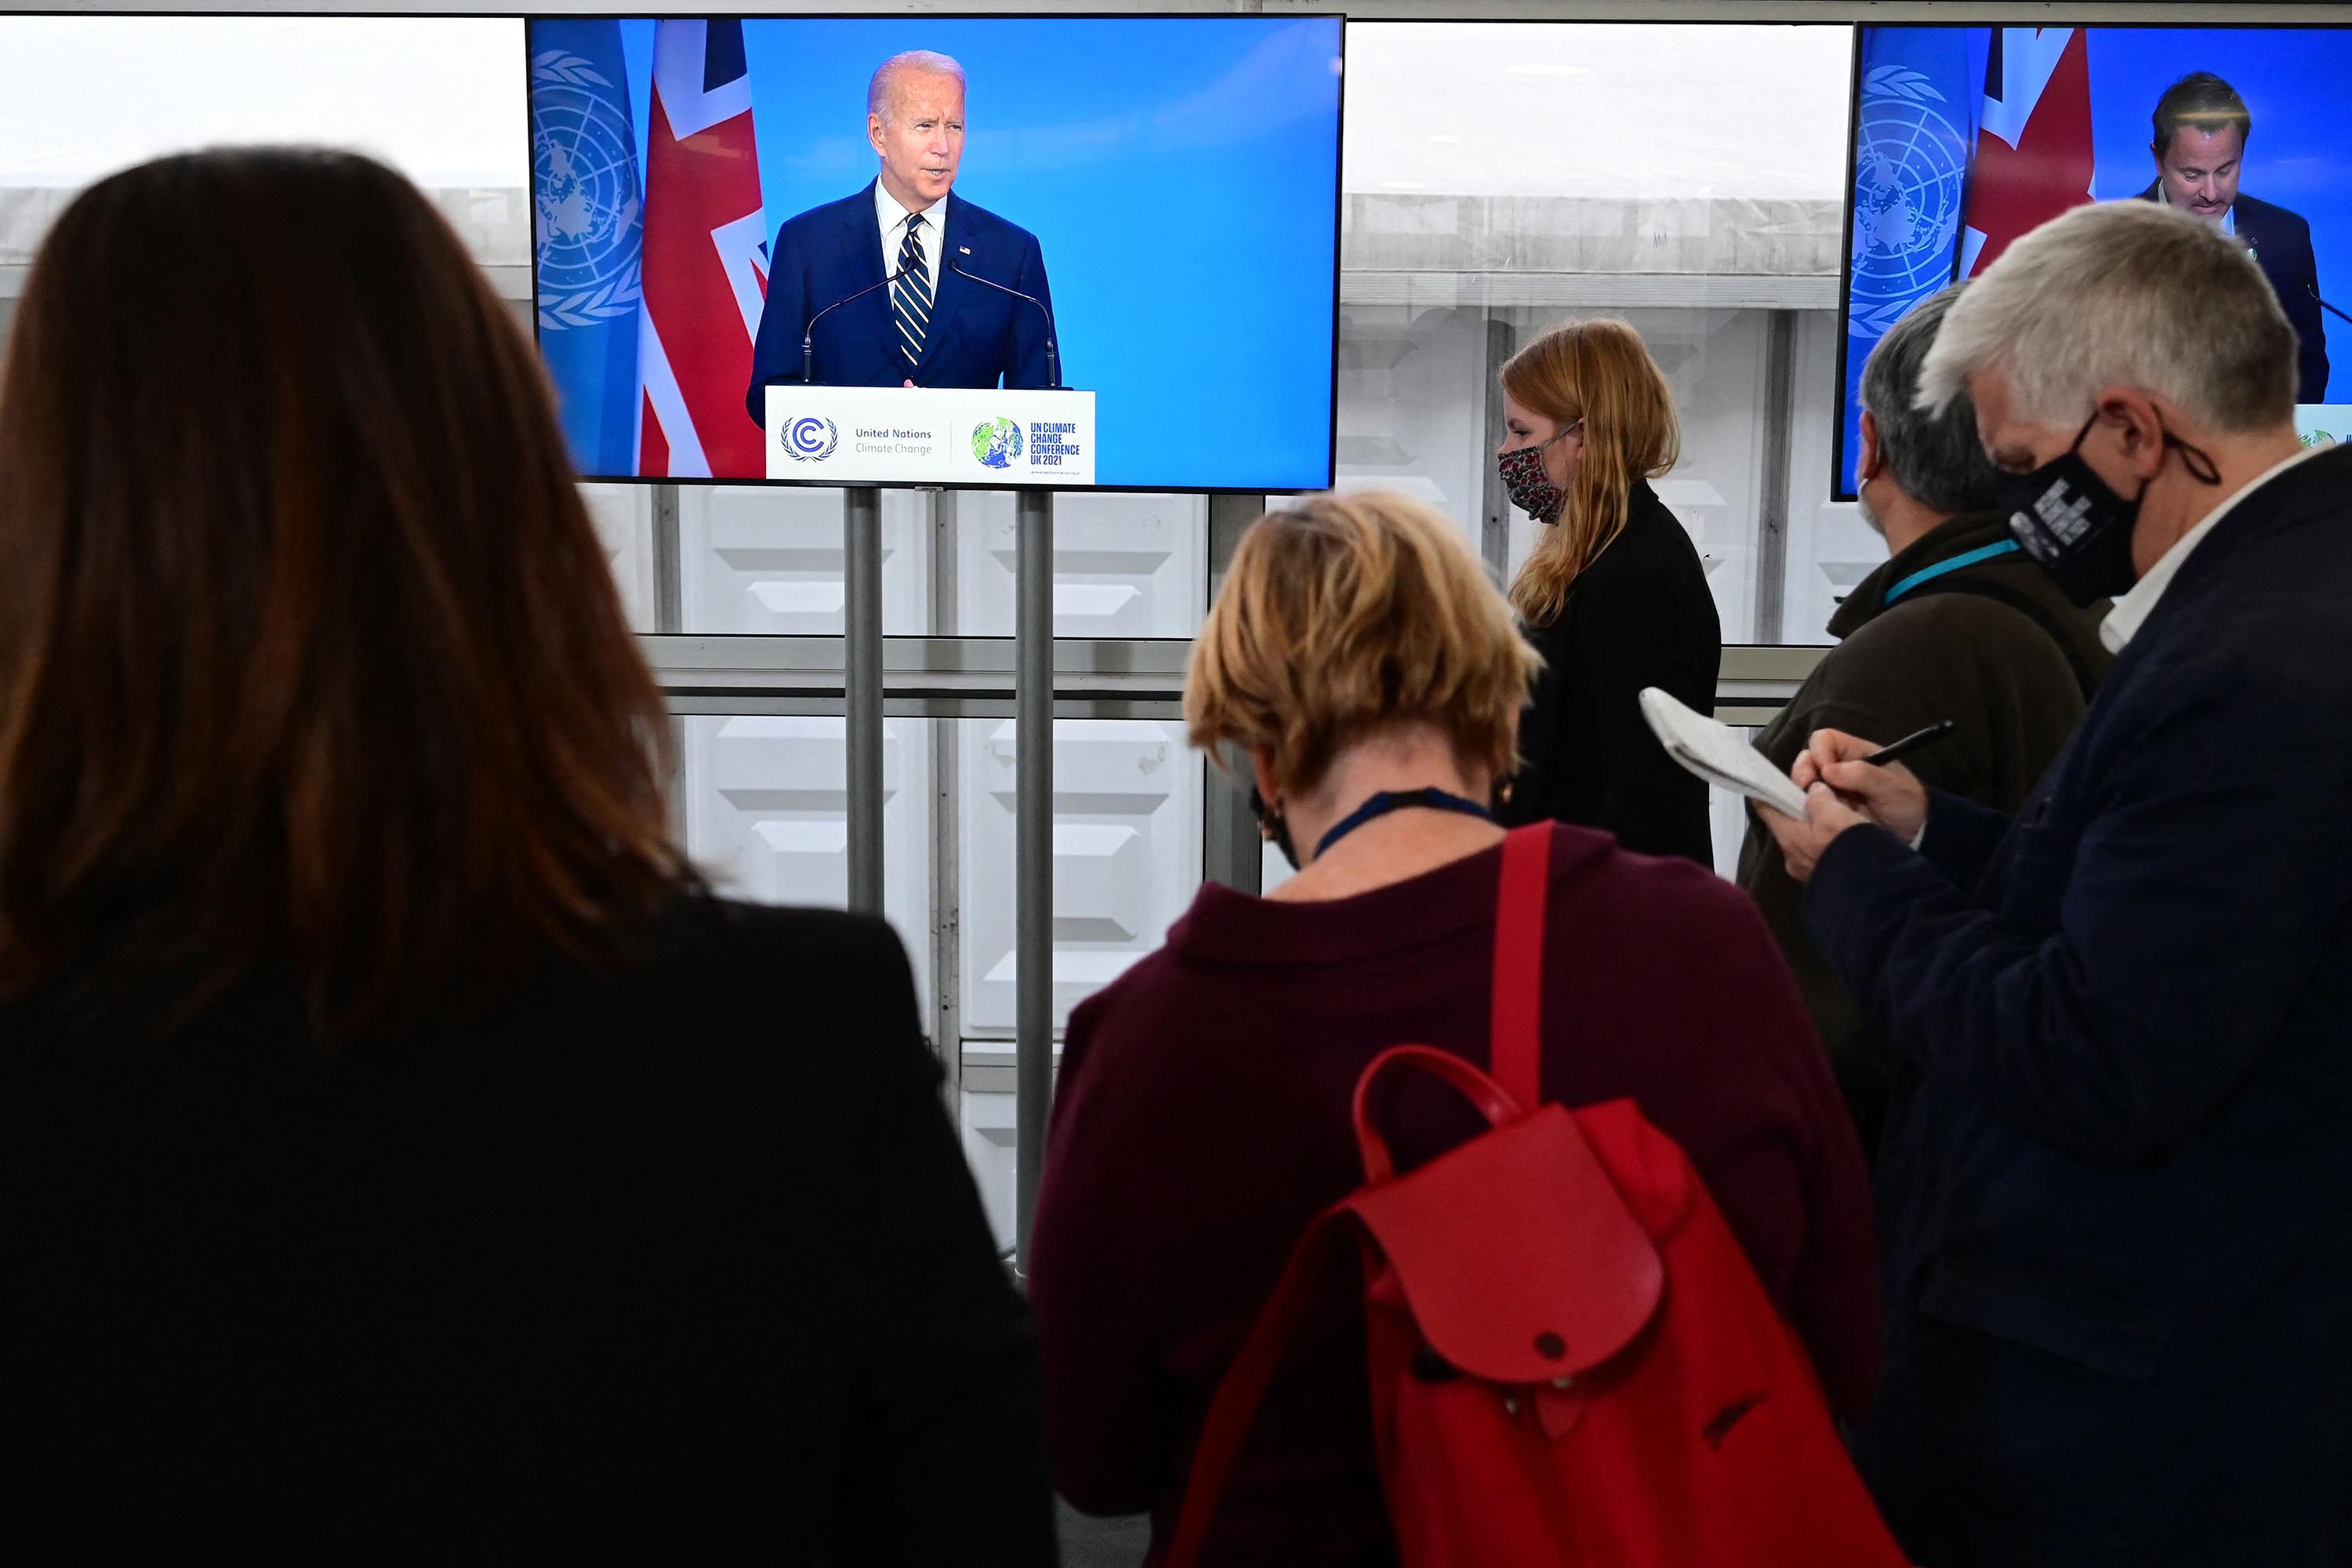 Journalists take notes as they listen to US President Joe Biden present his national statement as part of the World Leaders' Summit of the COP26 UN Climate Change Conference in Glasgow, Scotland on November 1.